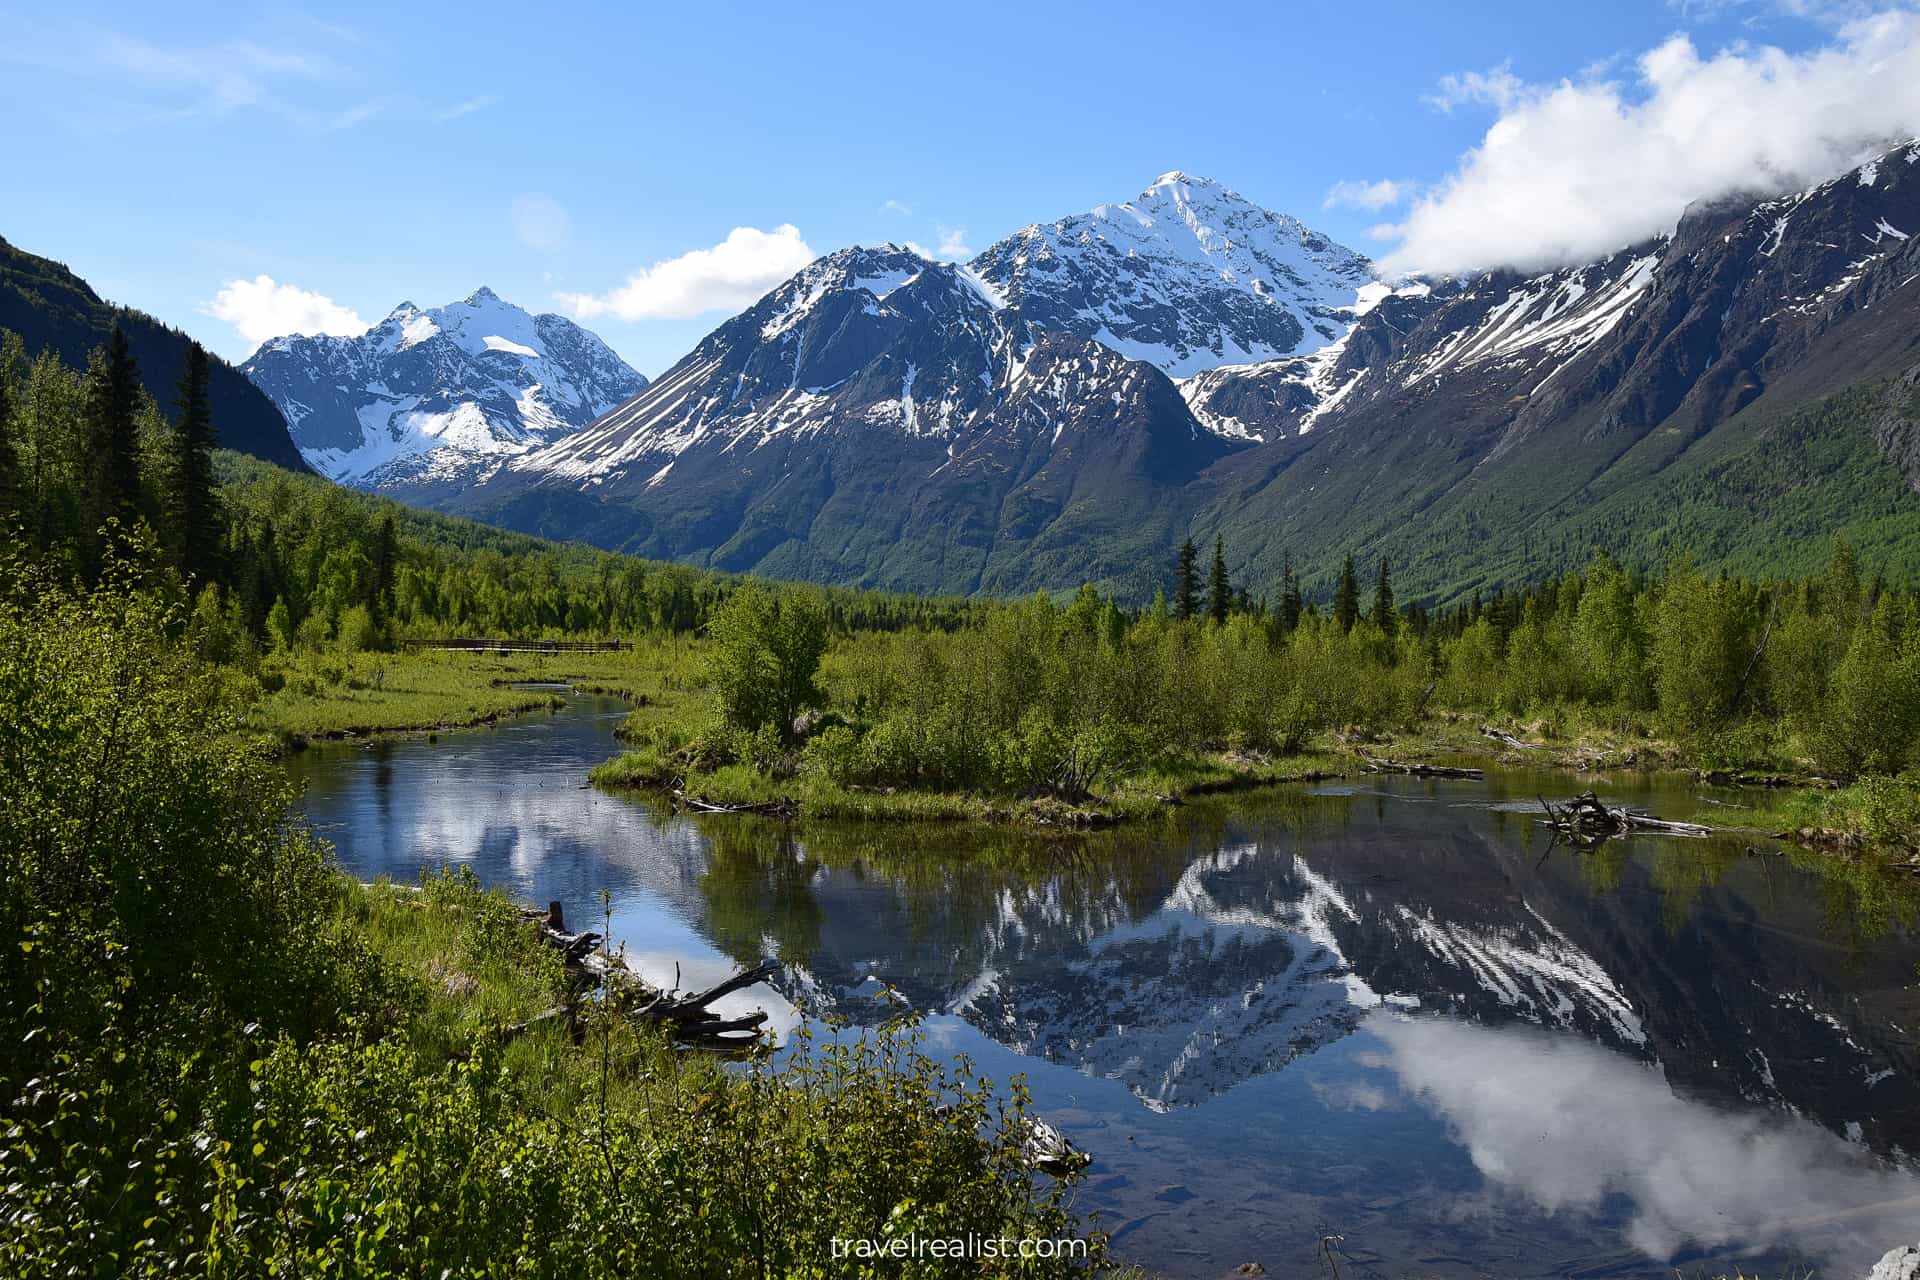 Views from Eagle River Nature Center in Chugach State Park in Alaska, US